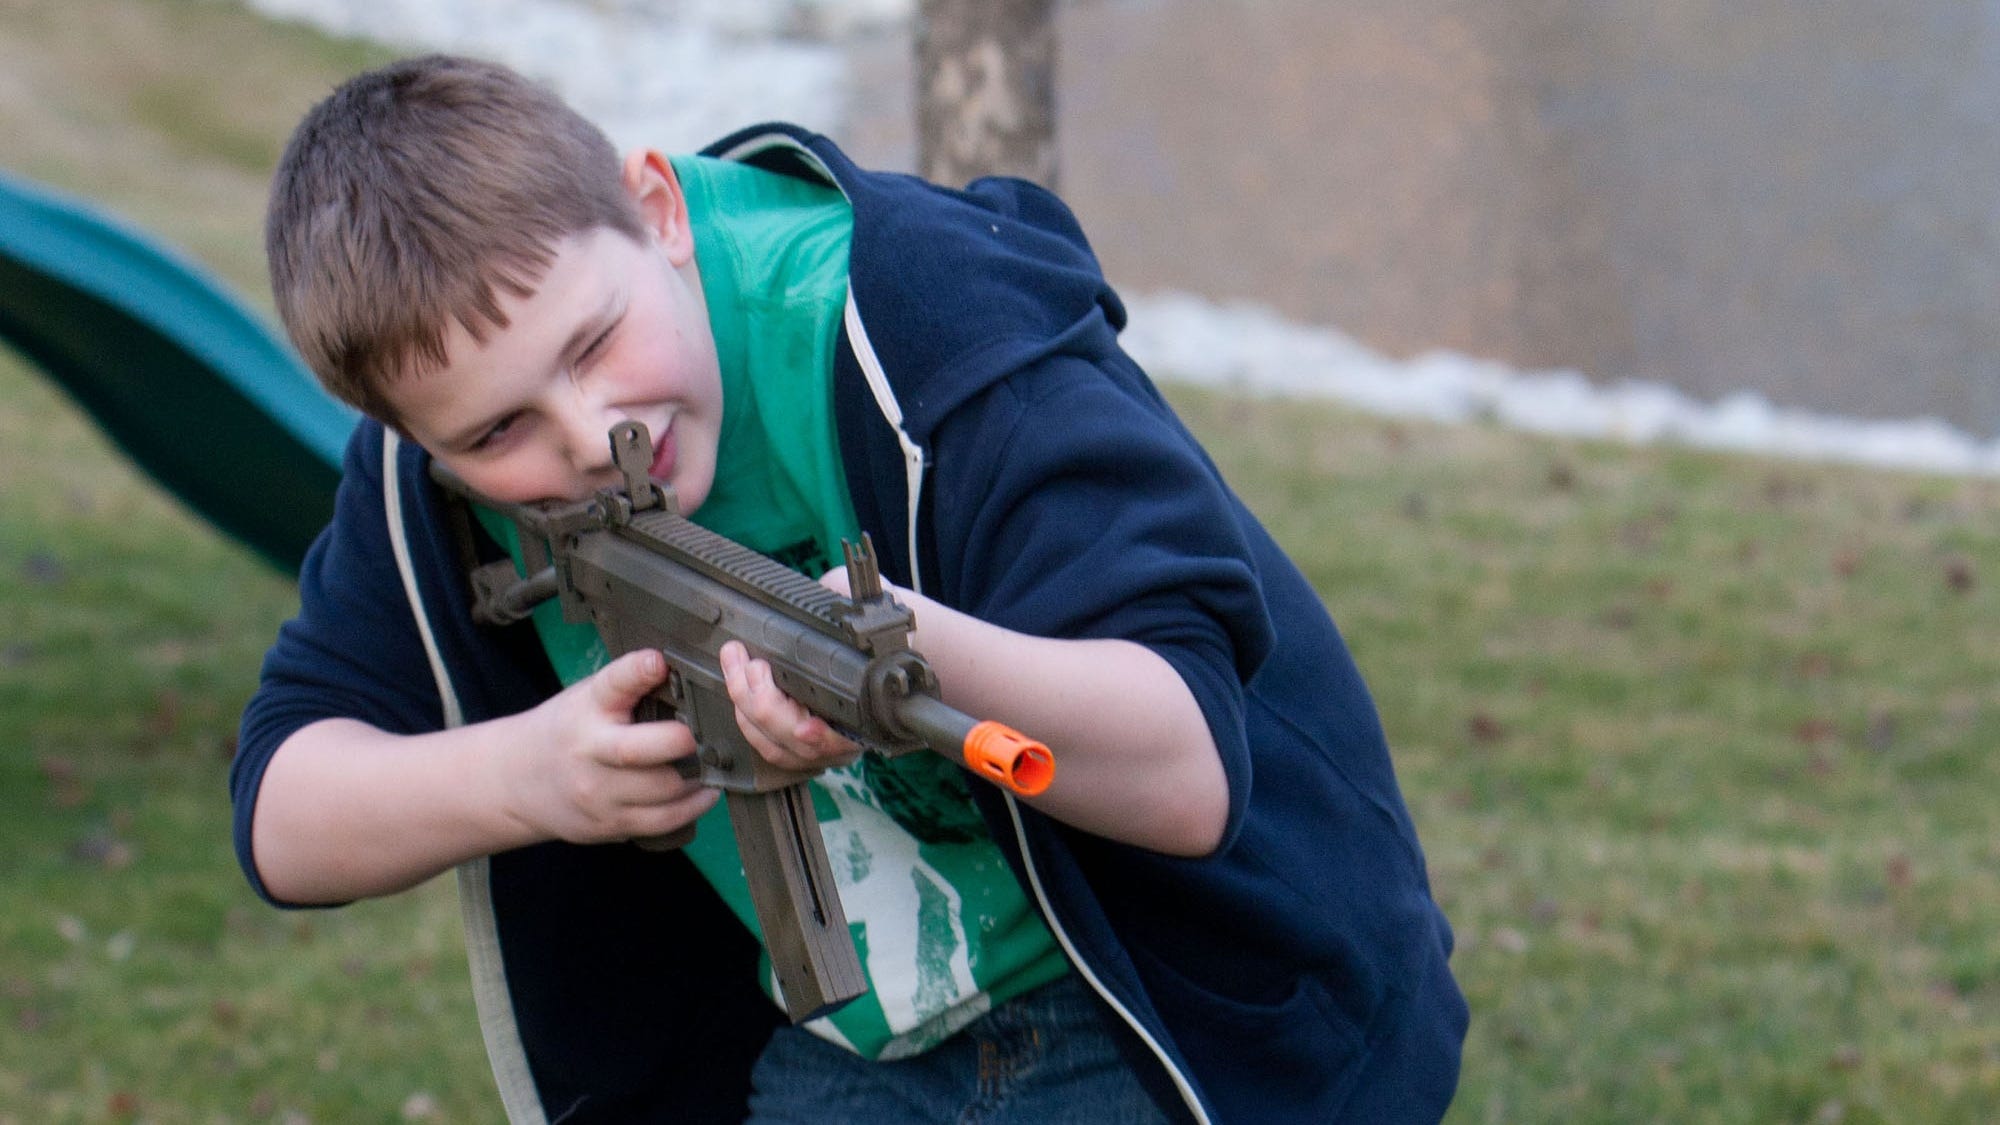 Are Toy Guns Ok For Kids Parents Are Split